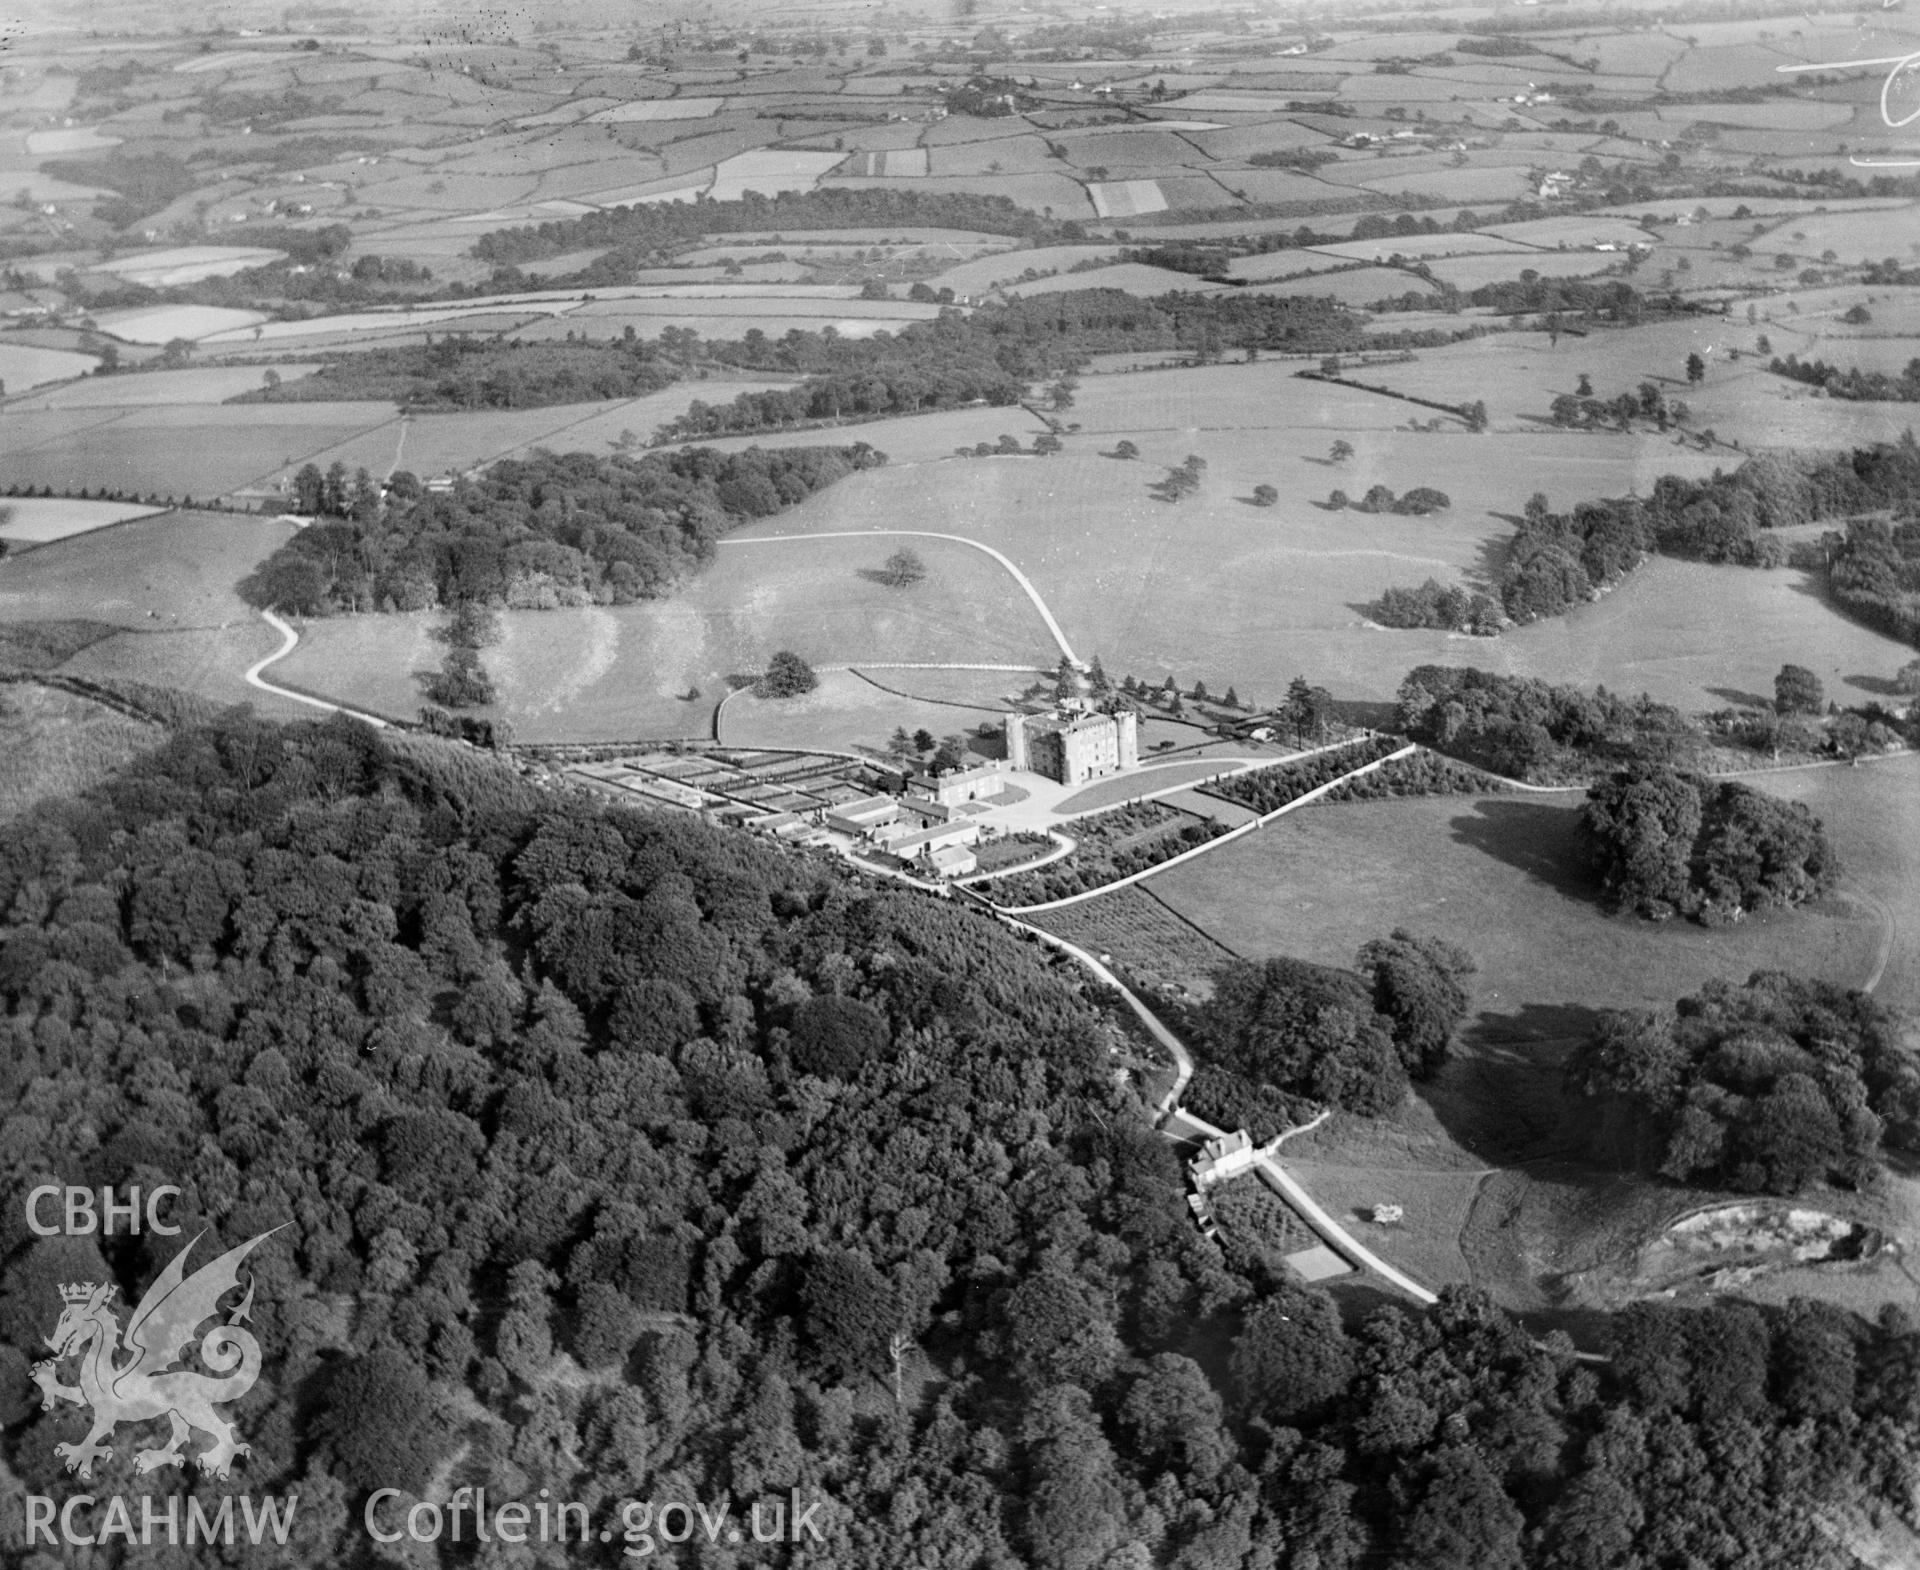 View of Ruperra Castle, Caerphilly, showing gardens, oblique aerial view. 5?x4? black and white glass plate negative.